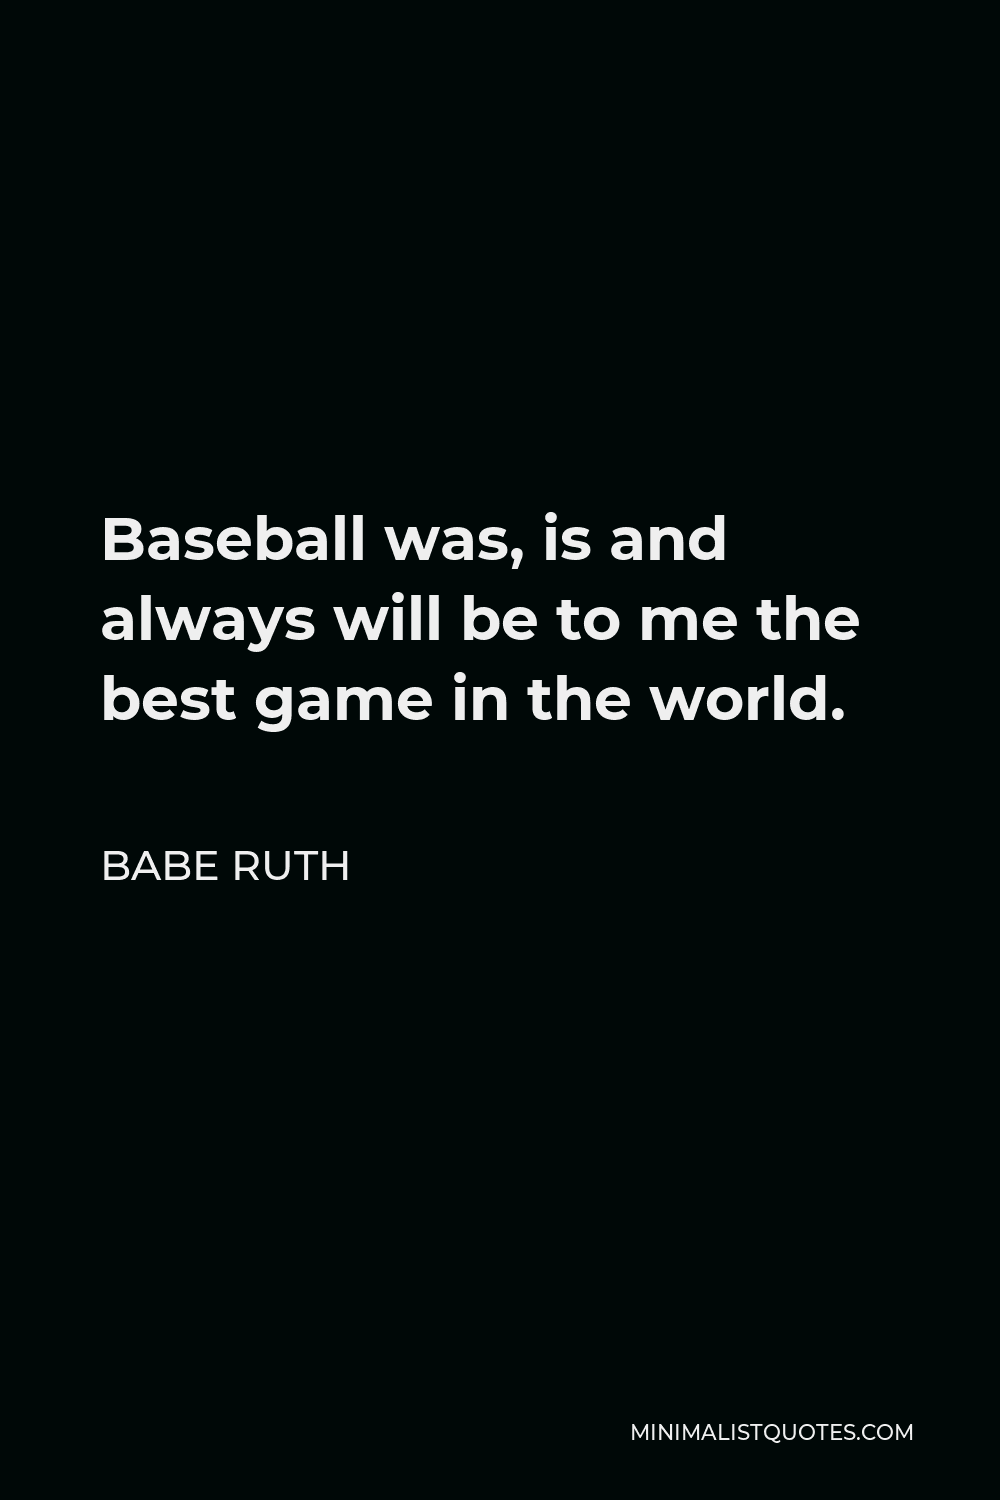 Babe Ruth Quote - Baseball was, is and always will be to me the best game in the world.